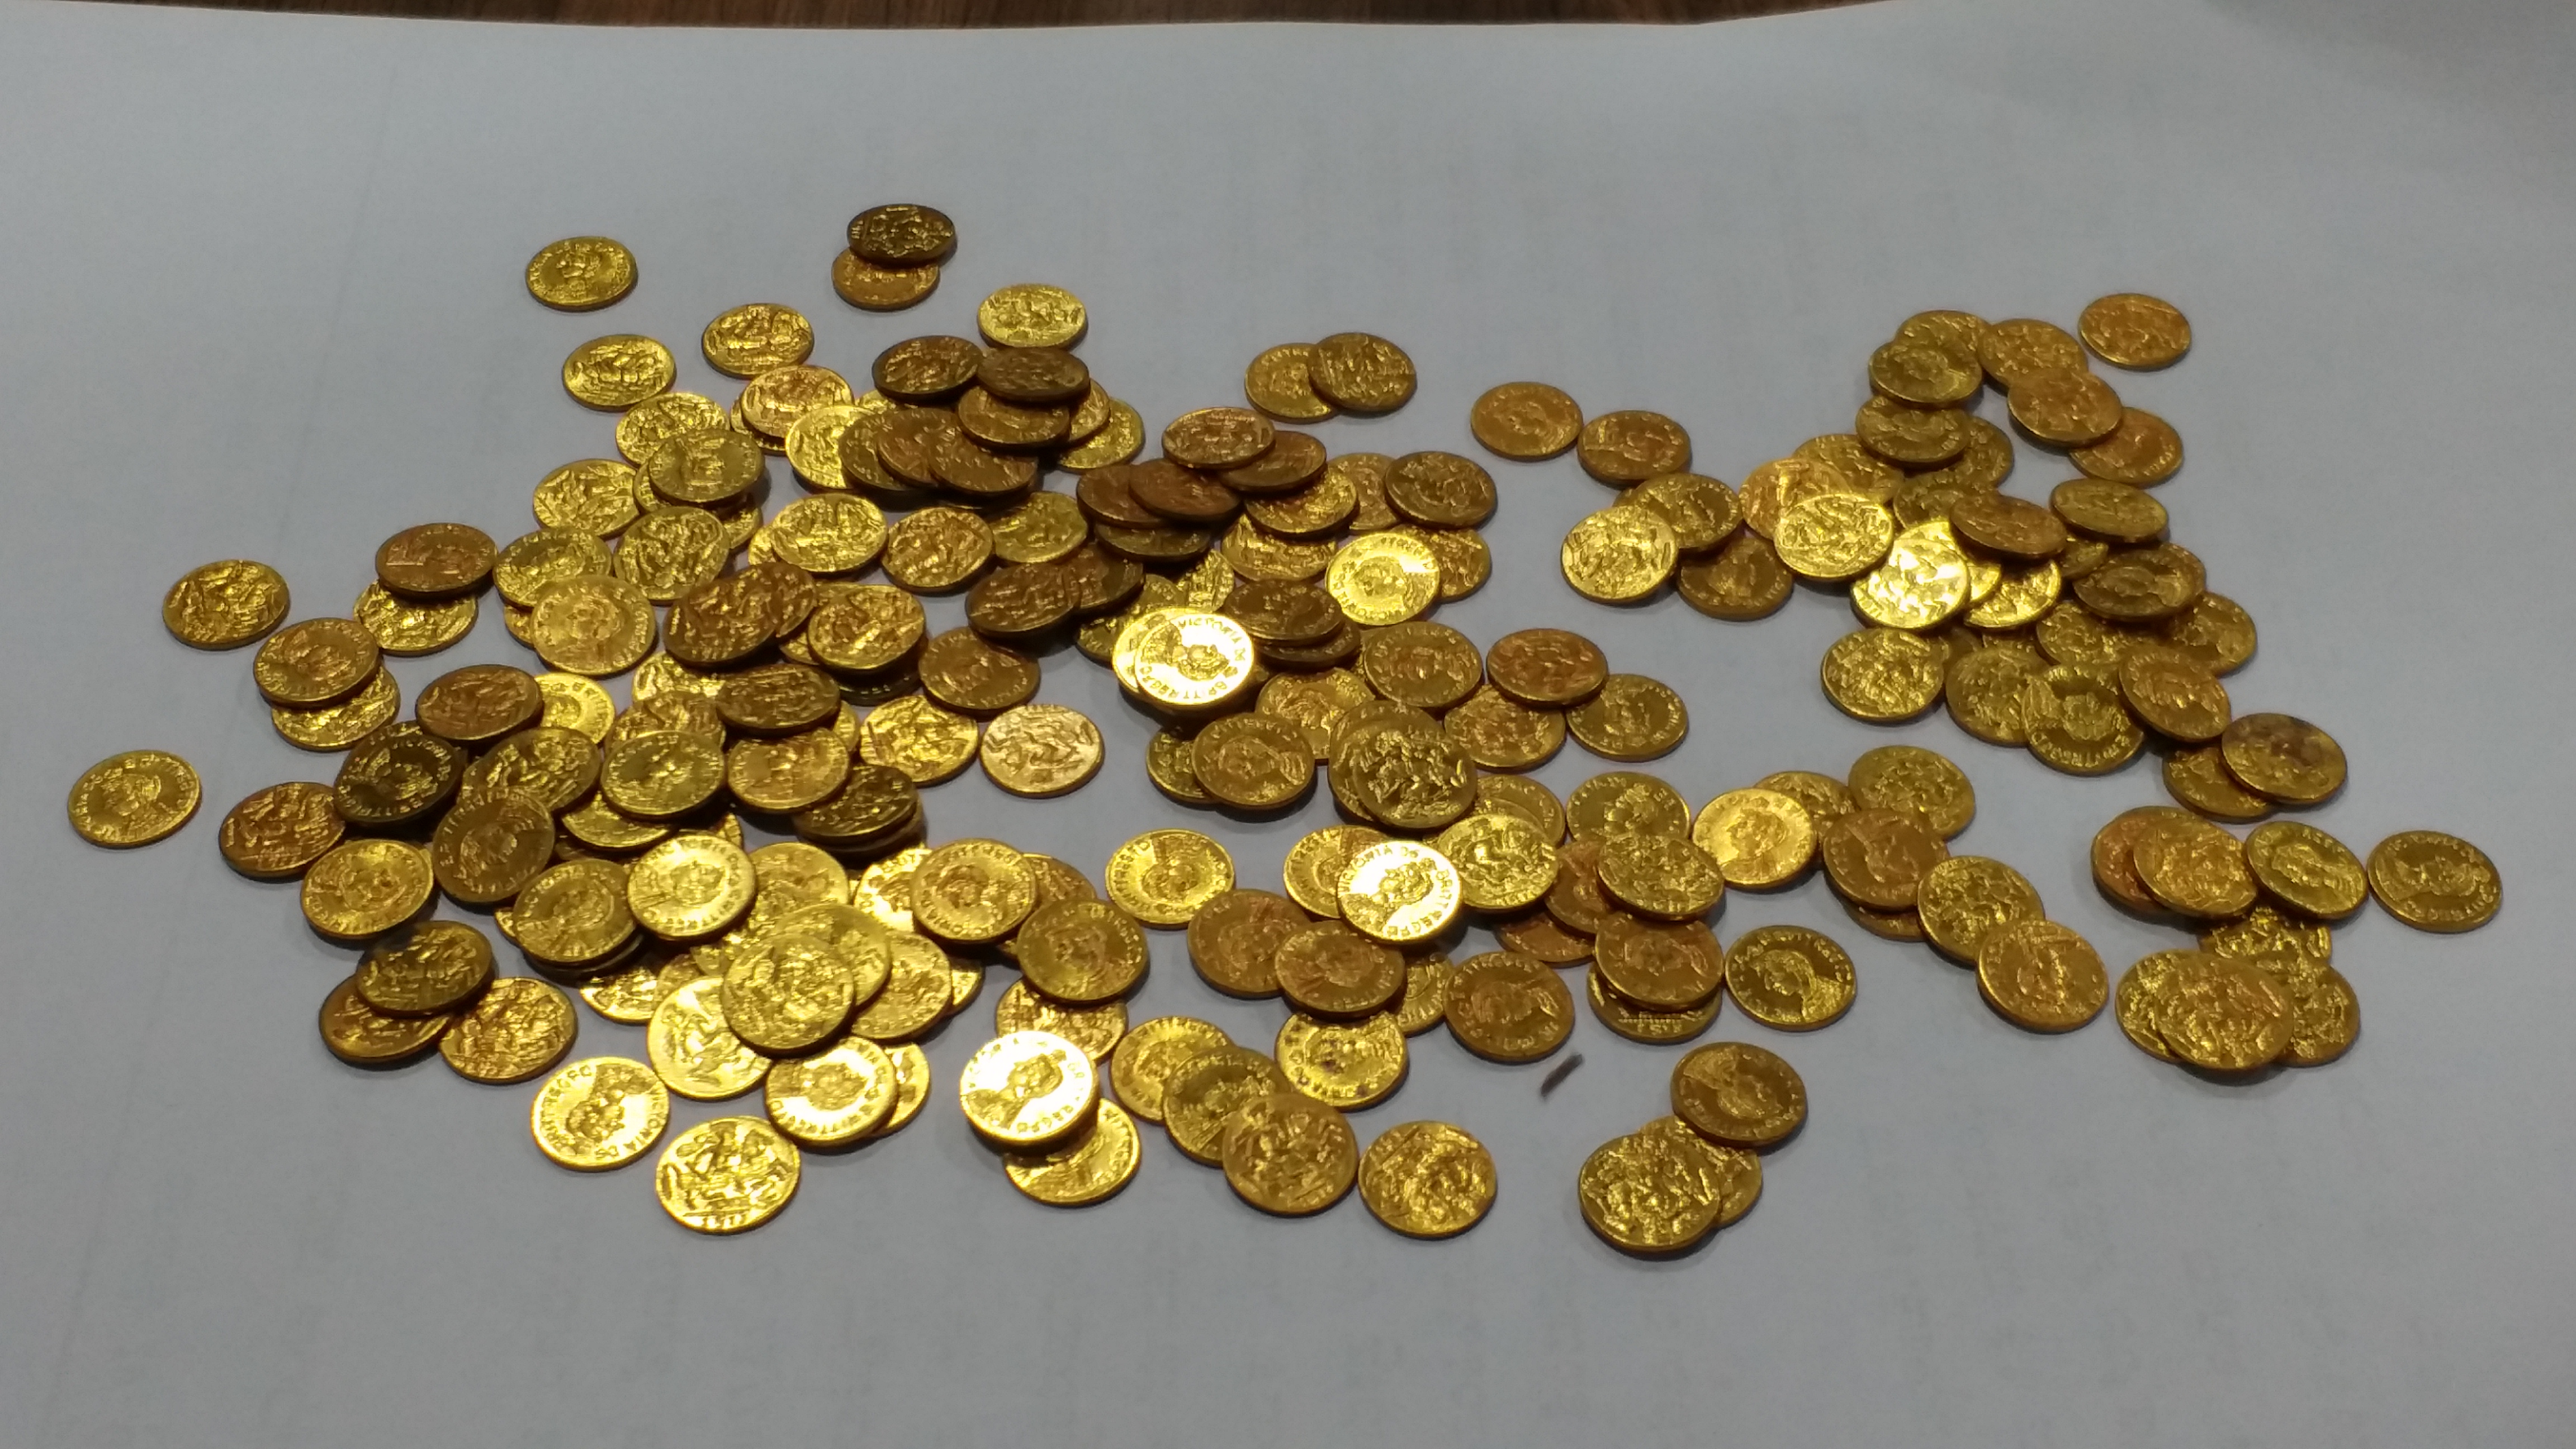 Man held for selling fake gold coins in  Davangere